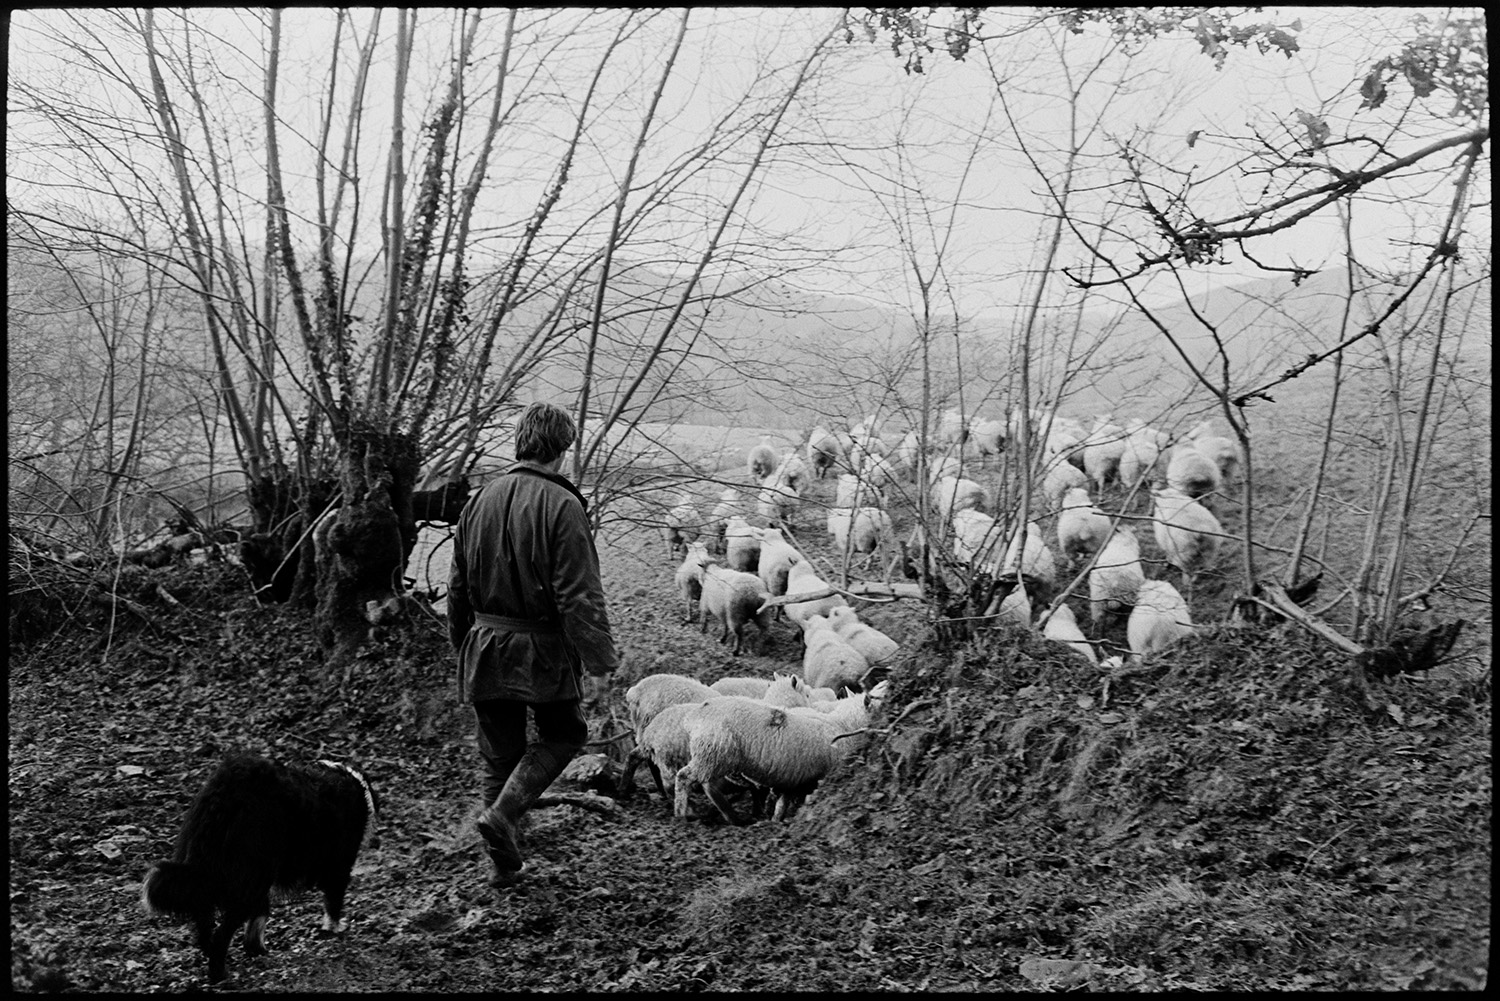 Farmer taking flock of sheep to new pasture. 
[A man, possibly from the Berry family, and a dog herding a flock of sheep through a muddy field to new pasture at Ashwell, Dolton.]